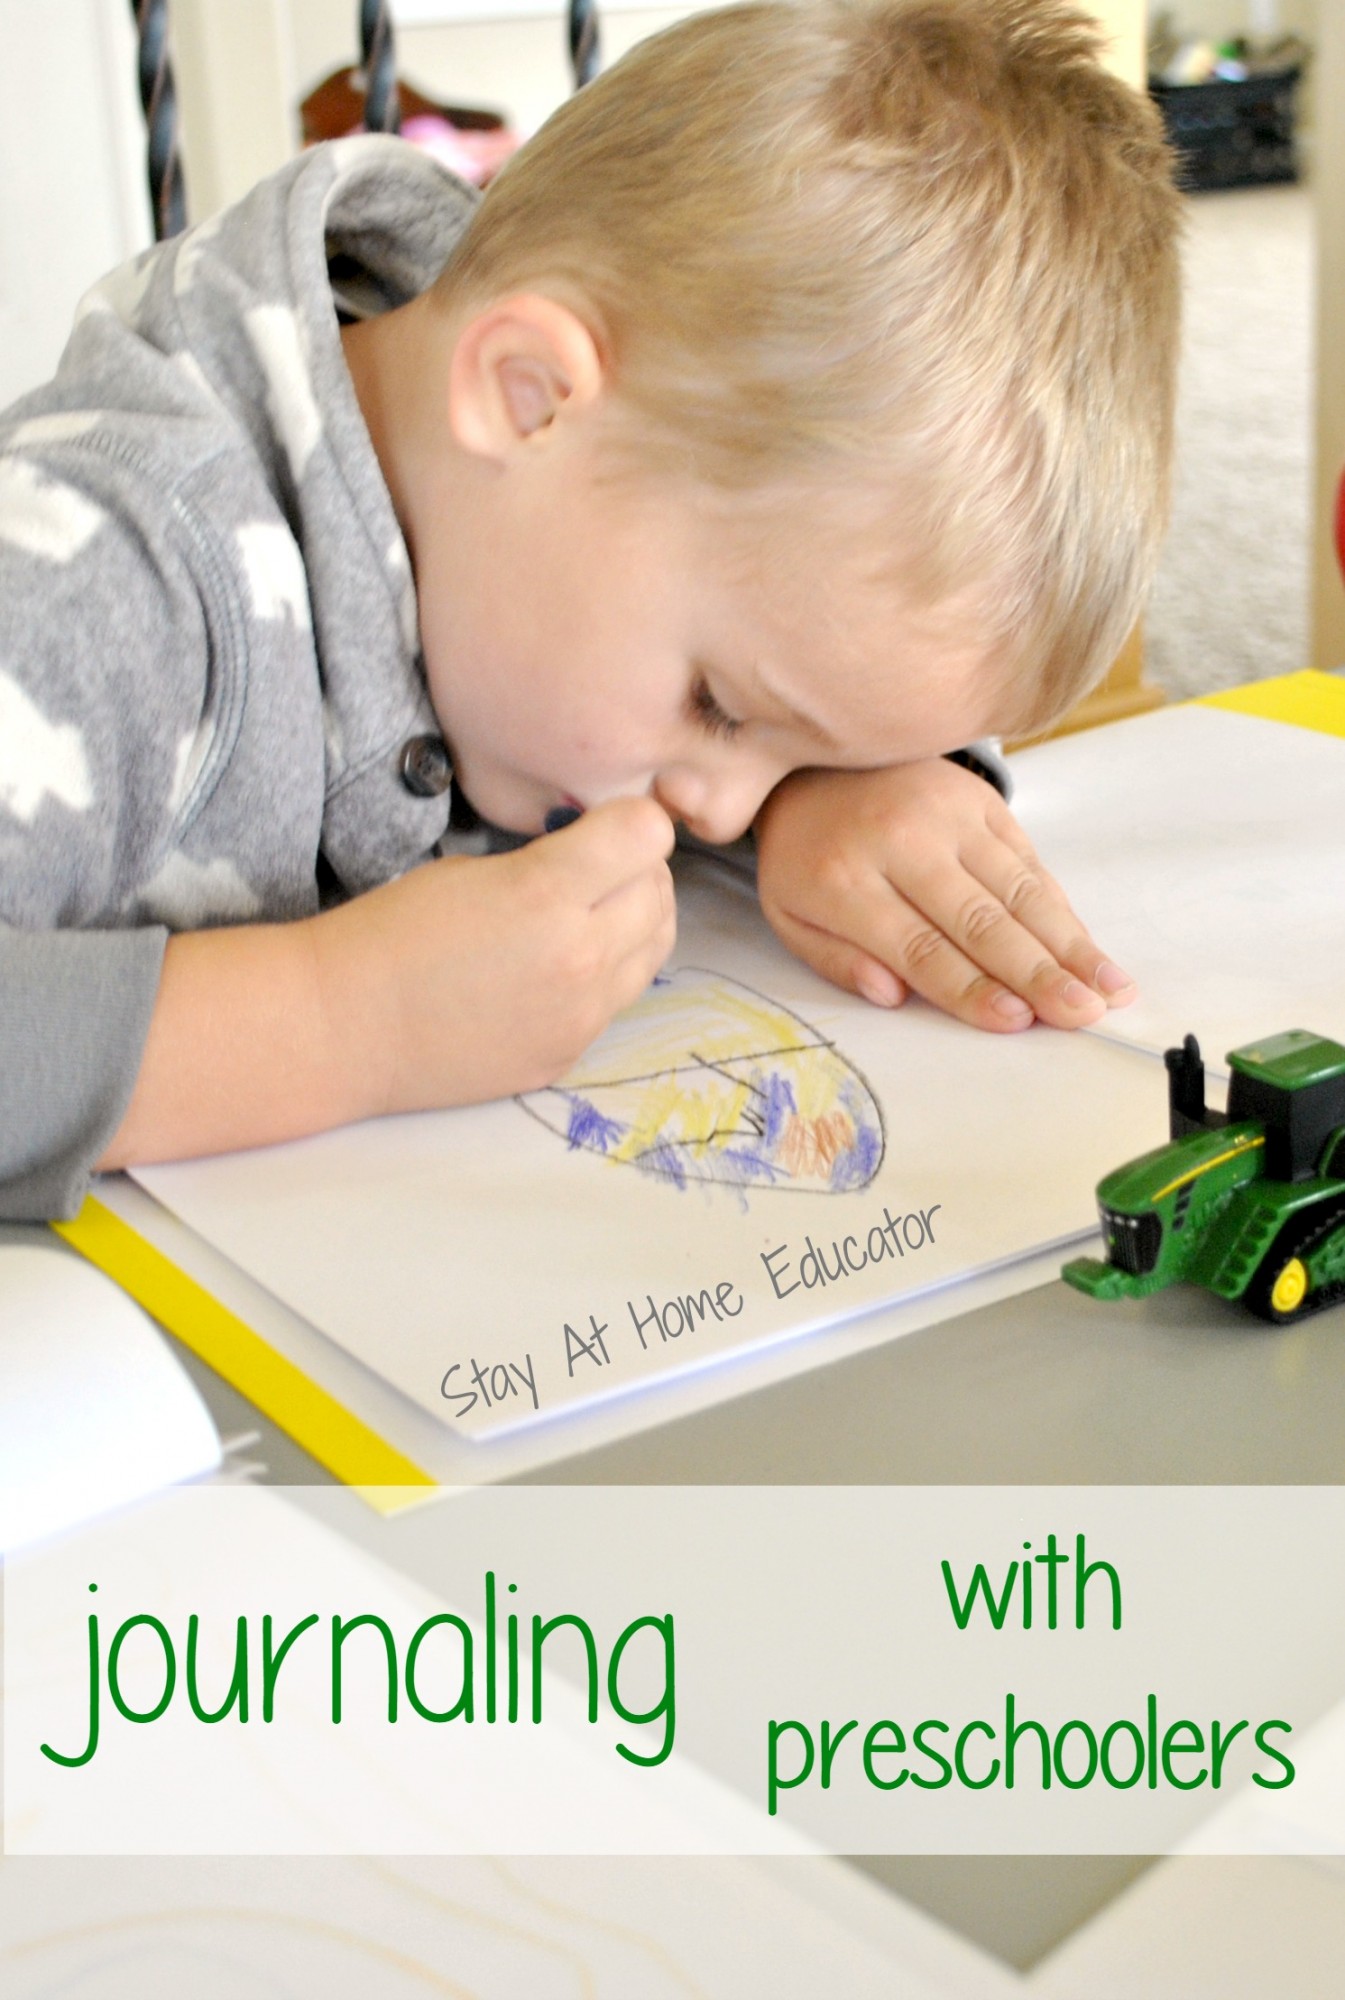 How to journal with preschoolers - Stay At Home Educator